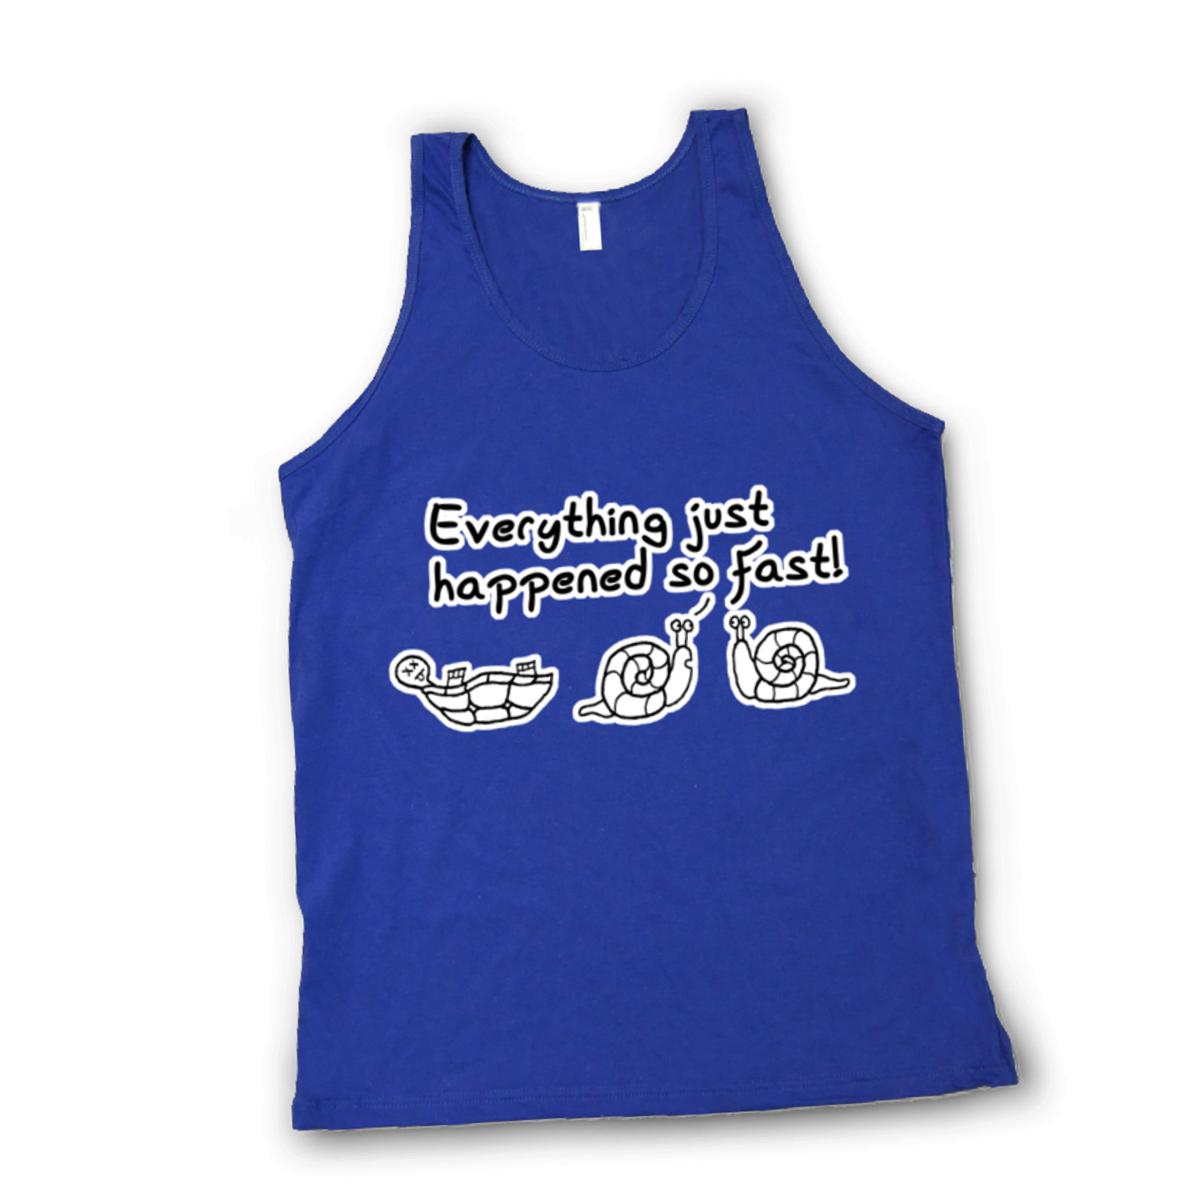 Happened So Fast Unisex Tank Top Double Extra Large lapis